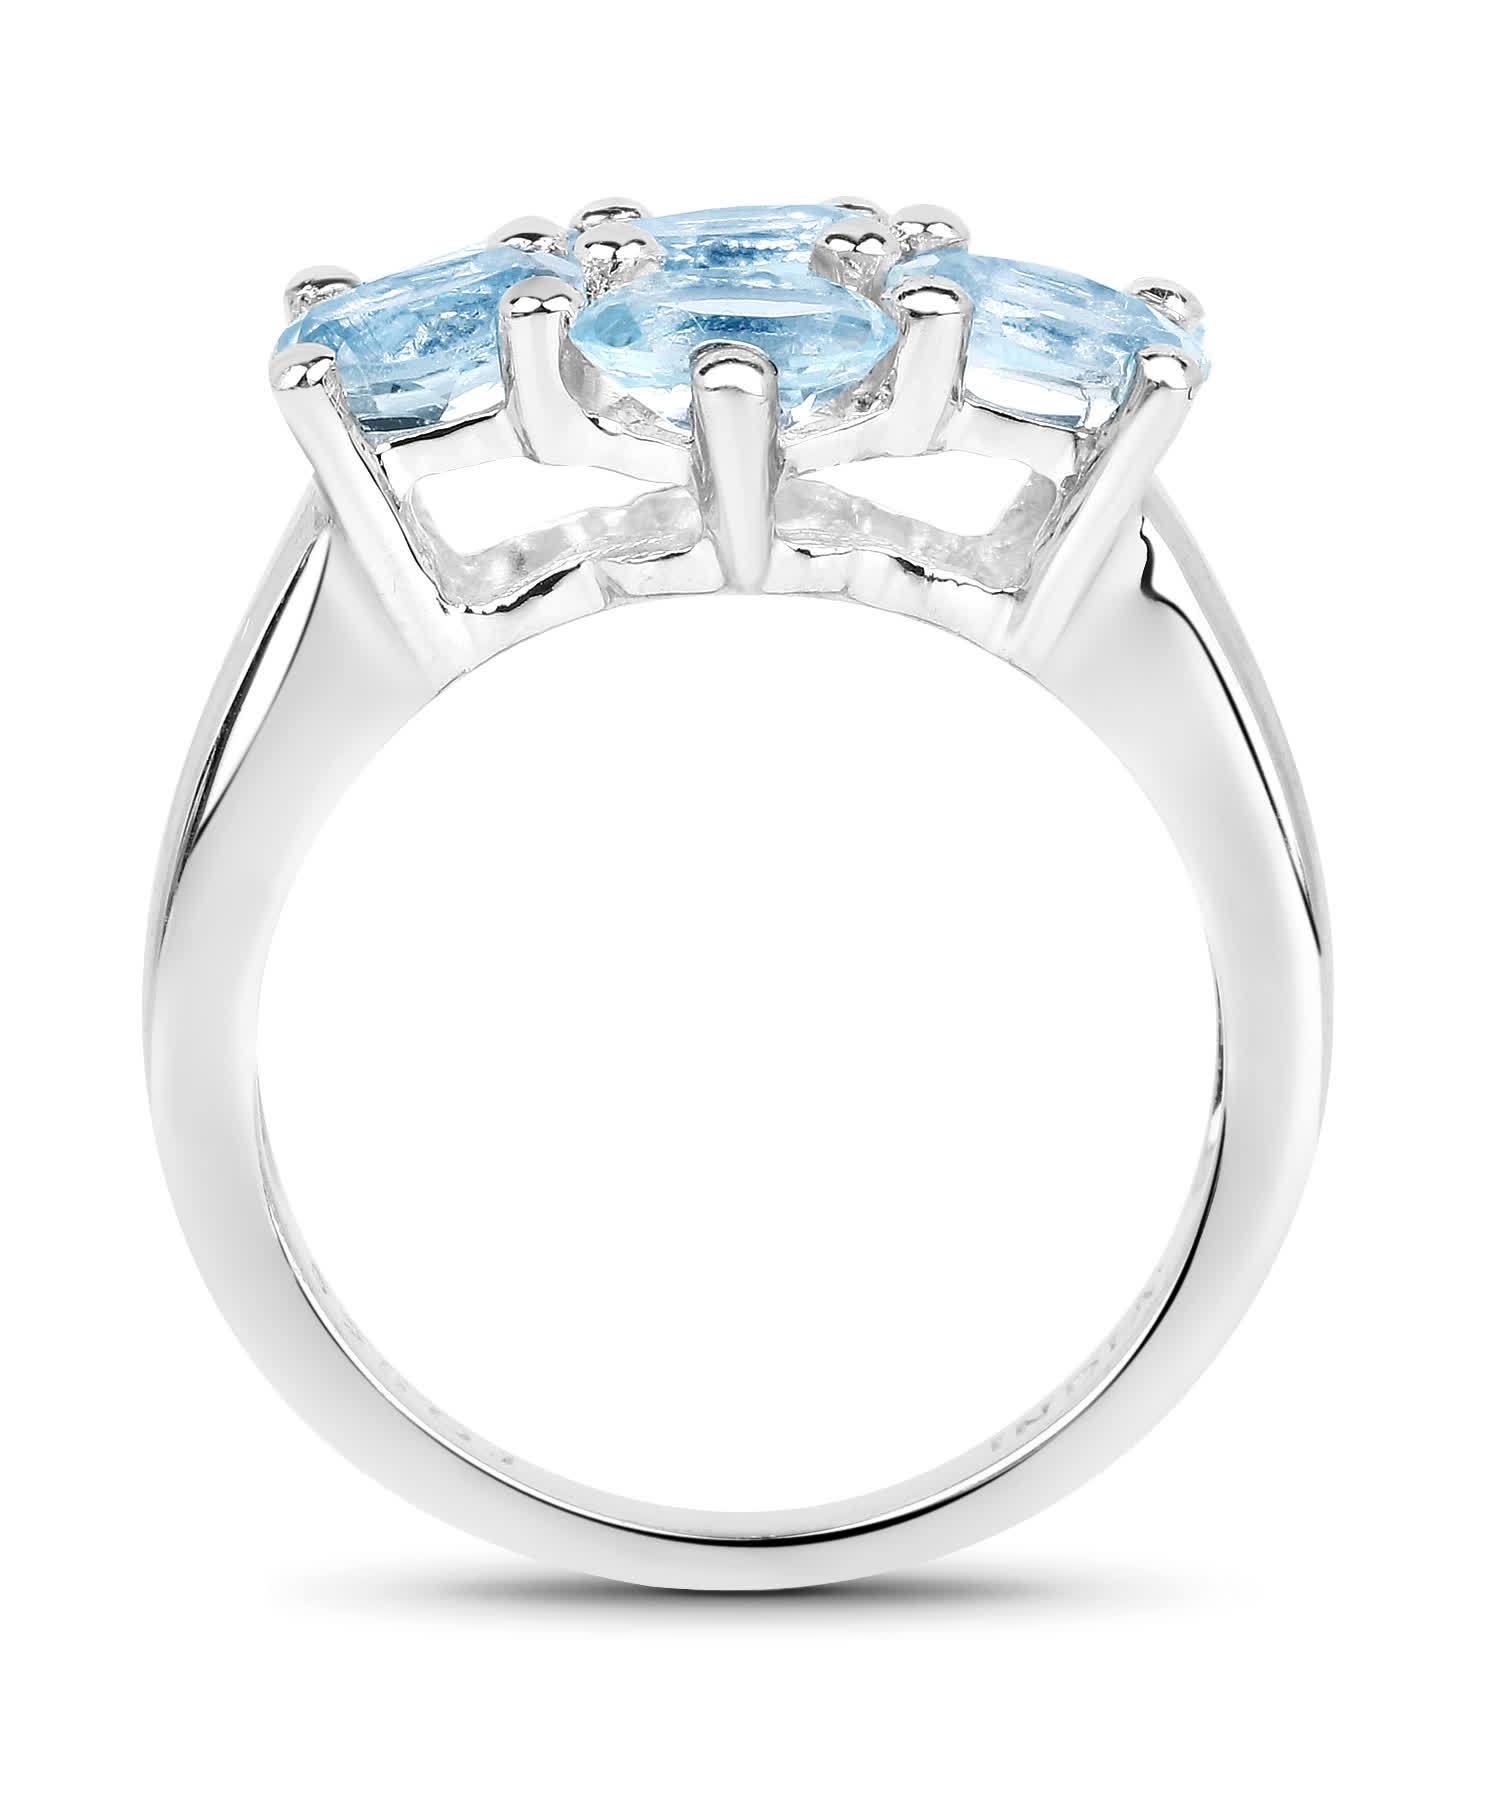 3.57ctw Natural Sky Blue Topaz Rhodium Plated 925 Sterling Silver Fashion Ring View 2